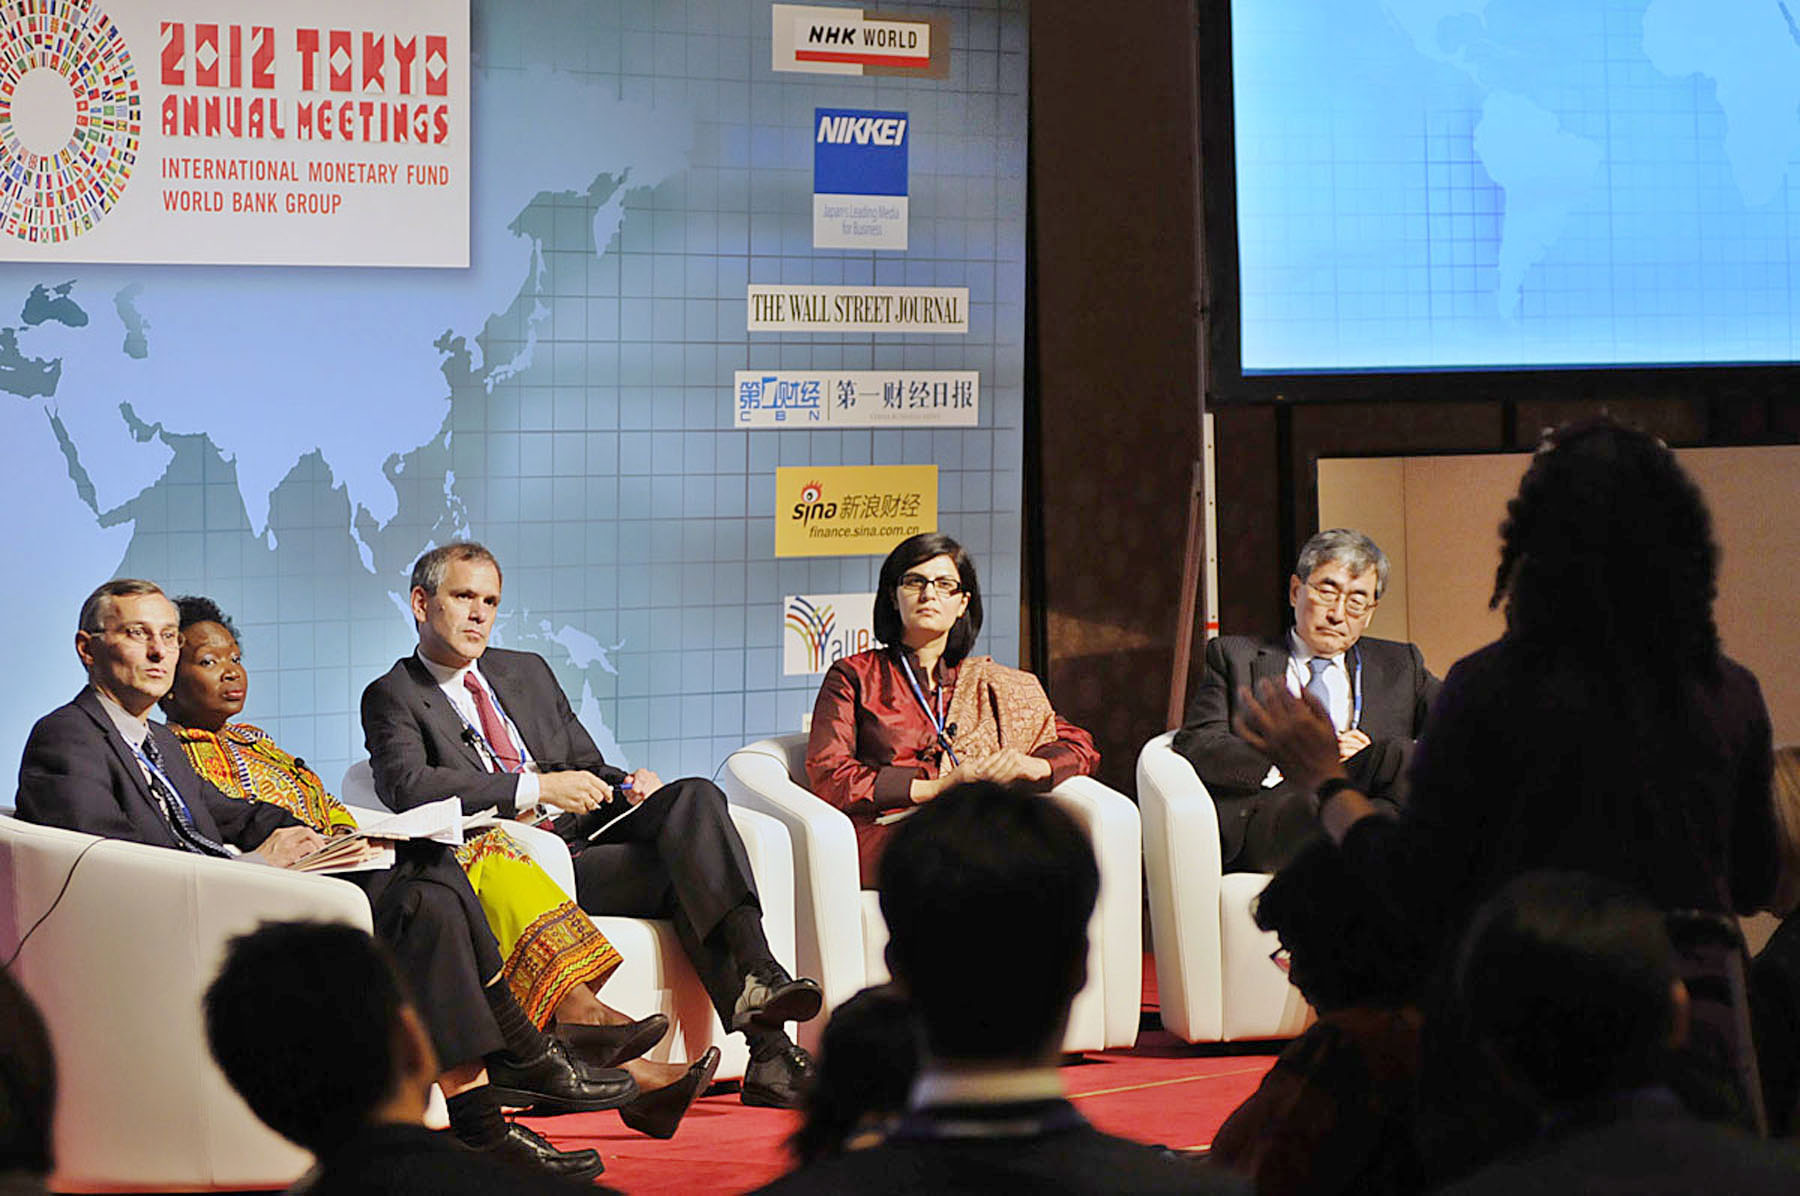 Sania Nishtar at a panel on the World Bank Annual Meeting in Tokyo 2012